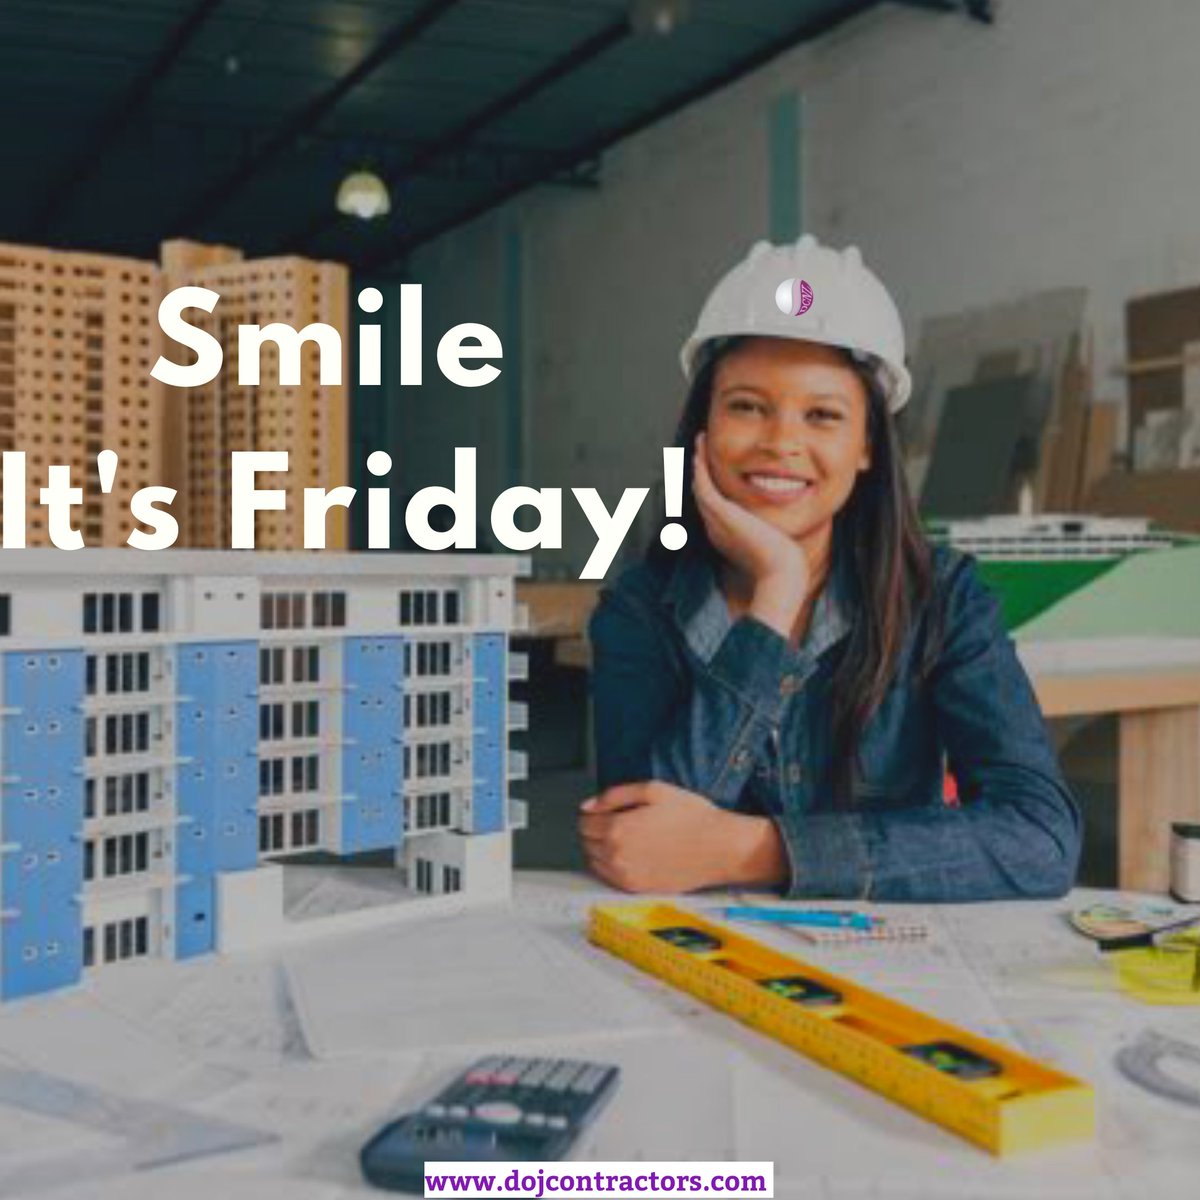 Happy Friday!
Wishing you an awesome weekend.

#dojcontractors #friday #tgif #happyweekend #happyfriday #staysafe #construction #design #renovation #interiordesign #architecture #facilitymanagement #office #officeimprovement #work #architect #design #creativity #homedecor #home